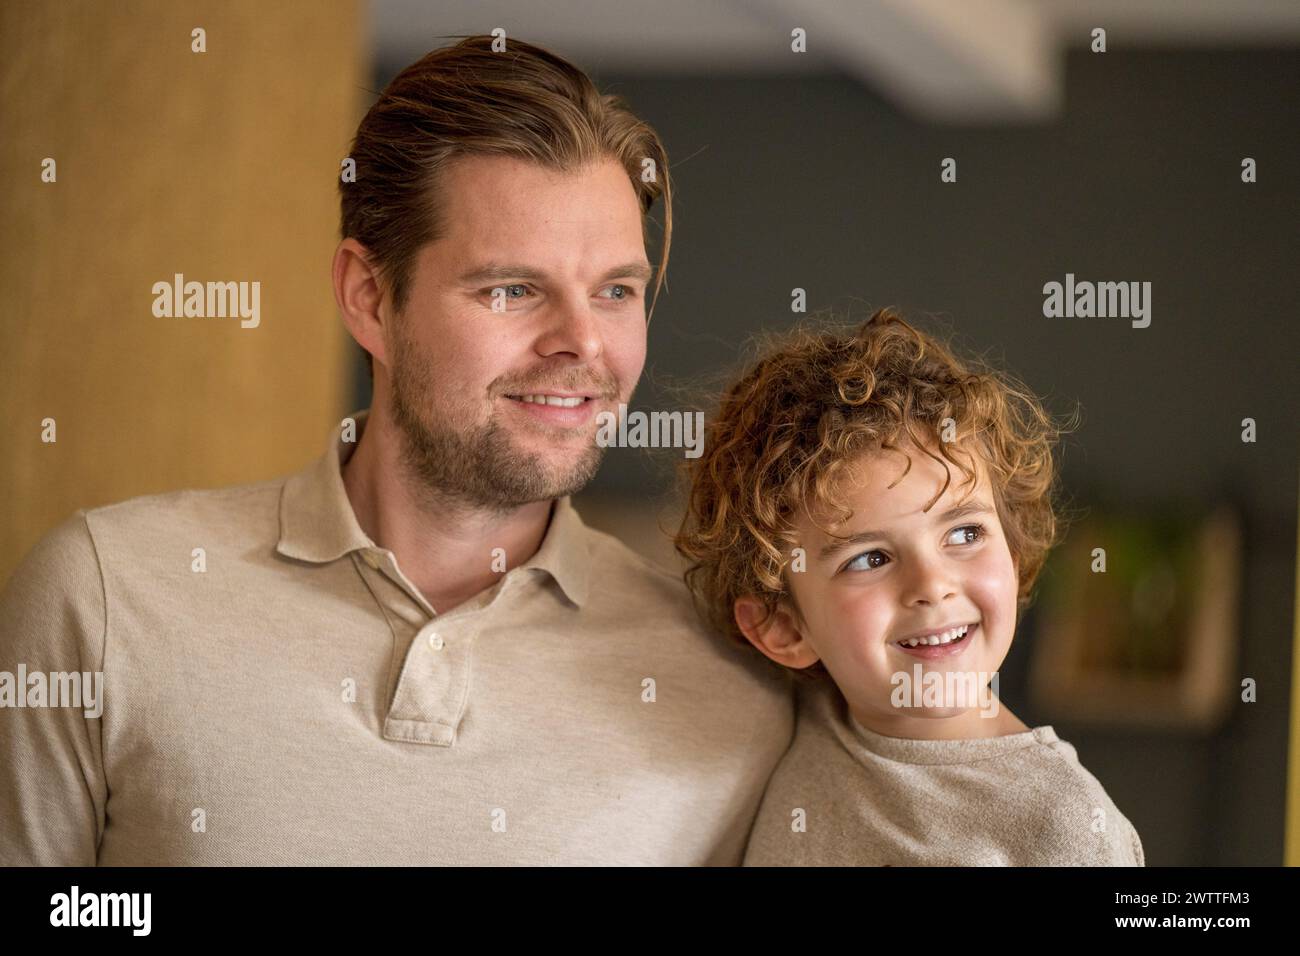 A smiling young child looks to the side with admiration beside a content adult male indoors Stock Photo